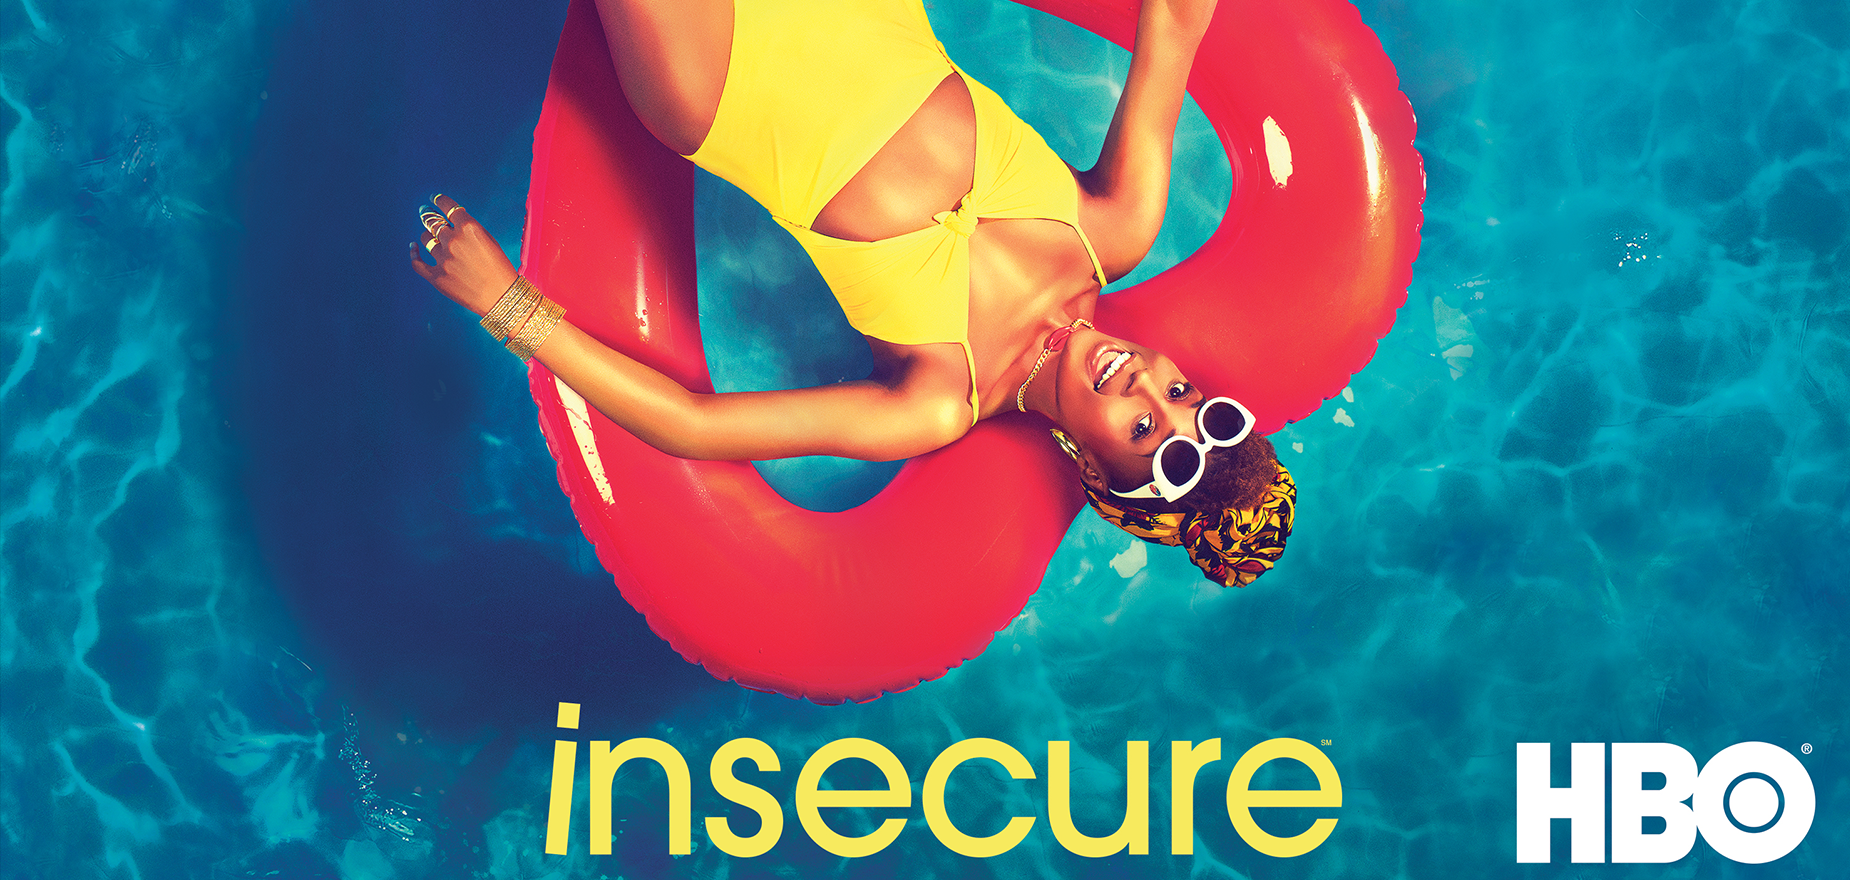 Insecure - HBO Entertainment in association with Issa Rae Productions, A Penny For Your Thoughts Entertainment and 3 Arts Entertainment